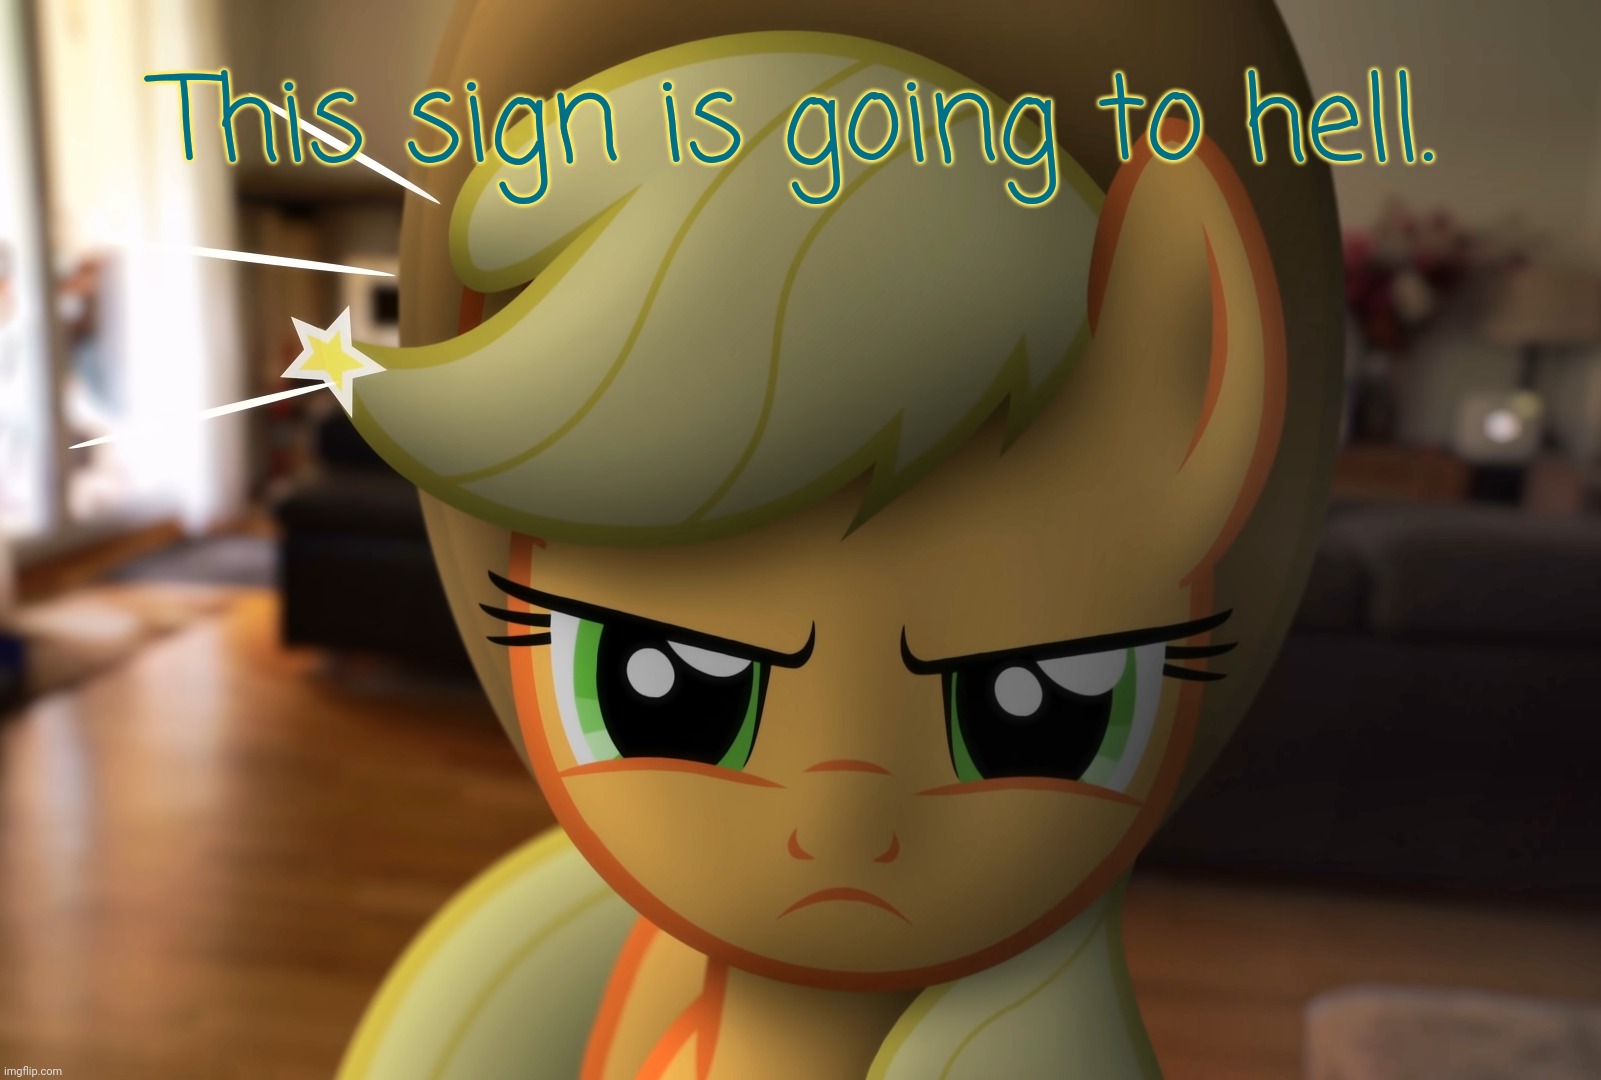 Unhappy Applejack (MLP in Real Life) | This sign is going to hell. | image tagged in unhappy applejack mlp in real life | made w/ Imgflip meme maker